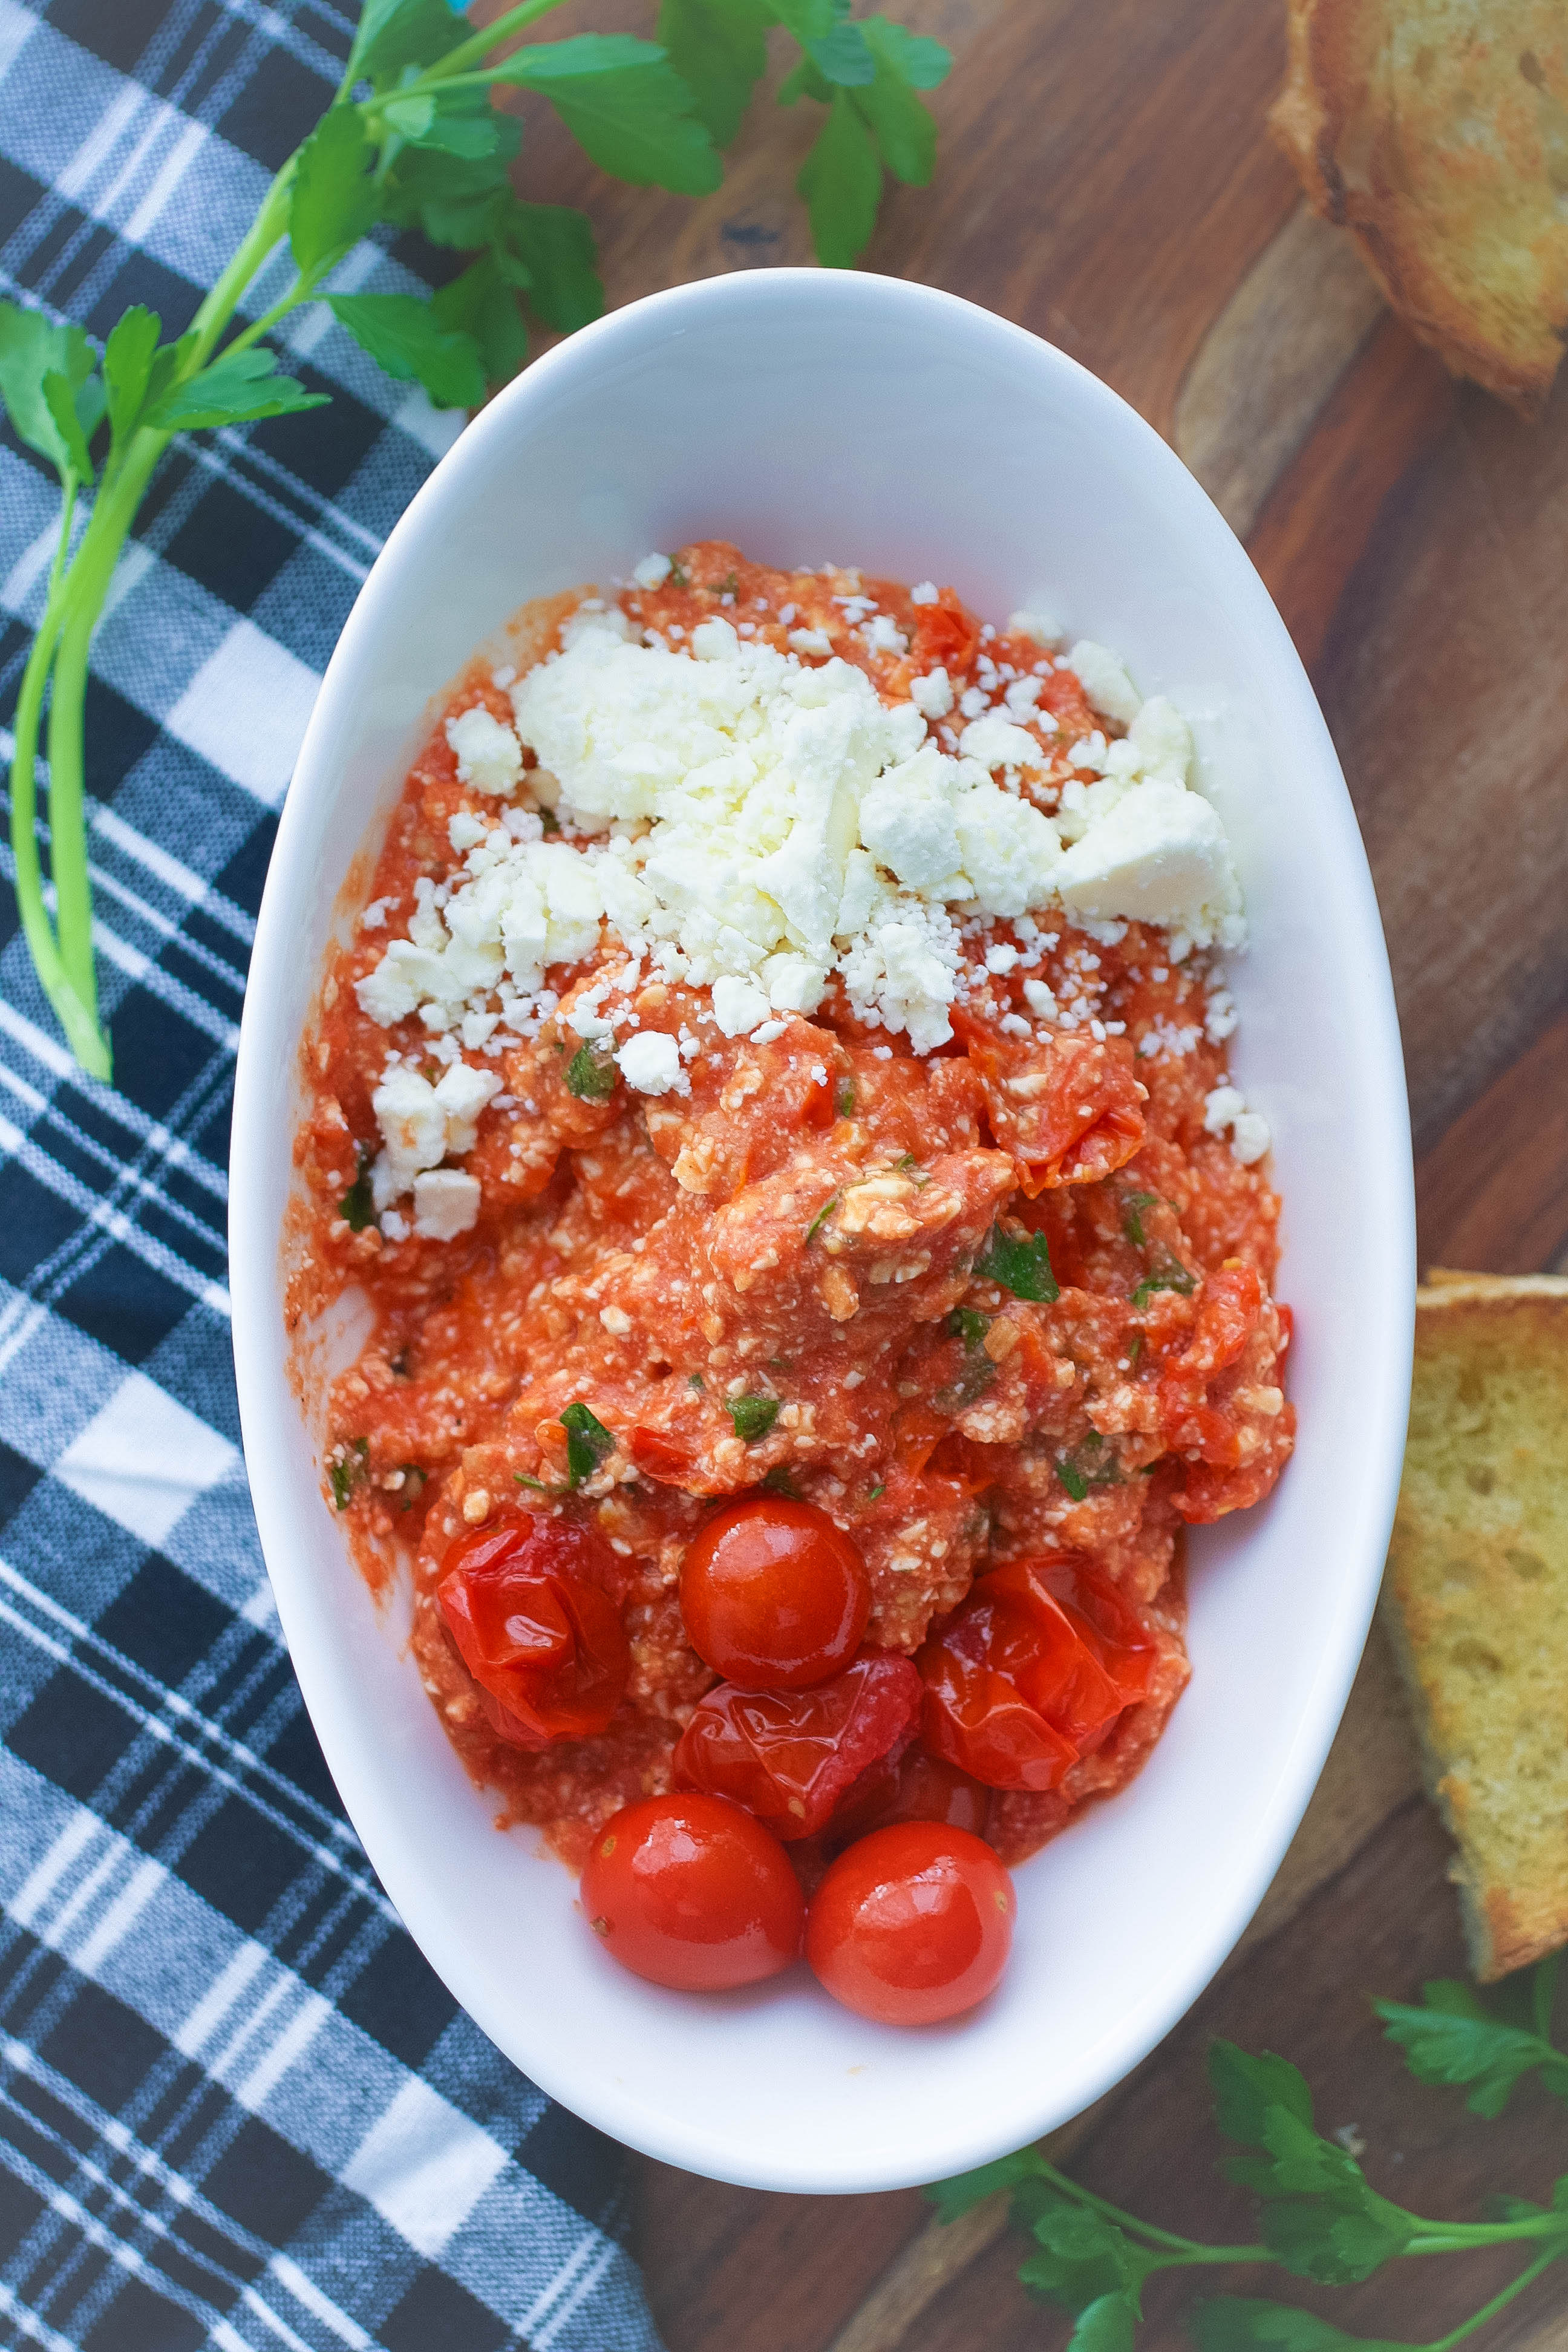 Roasted Tomato & Garlic and Feta Spread is a treat for anytime. You'll love Roasted Tomato & Garlic and Feta Spread as your next appetizer.